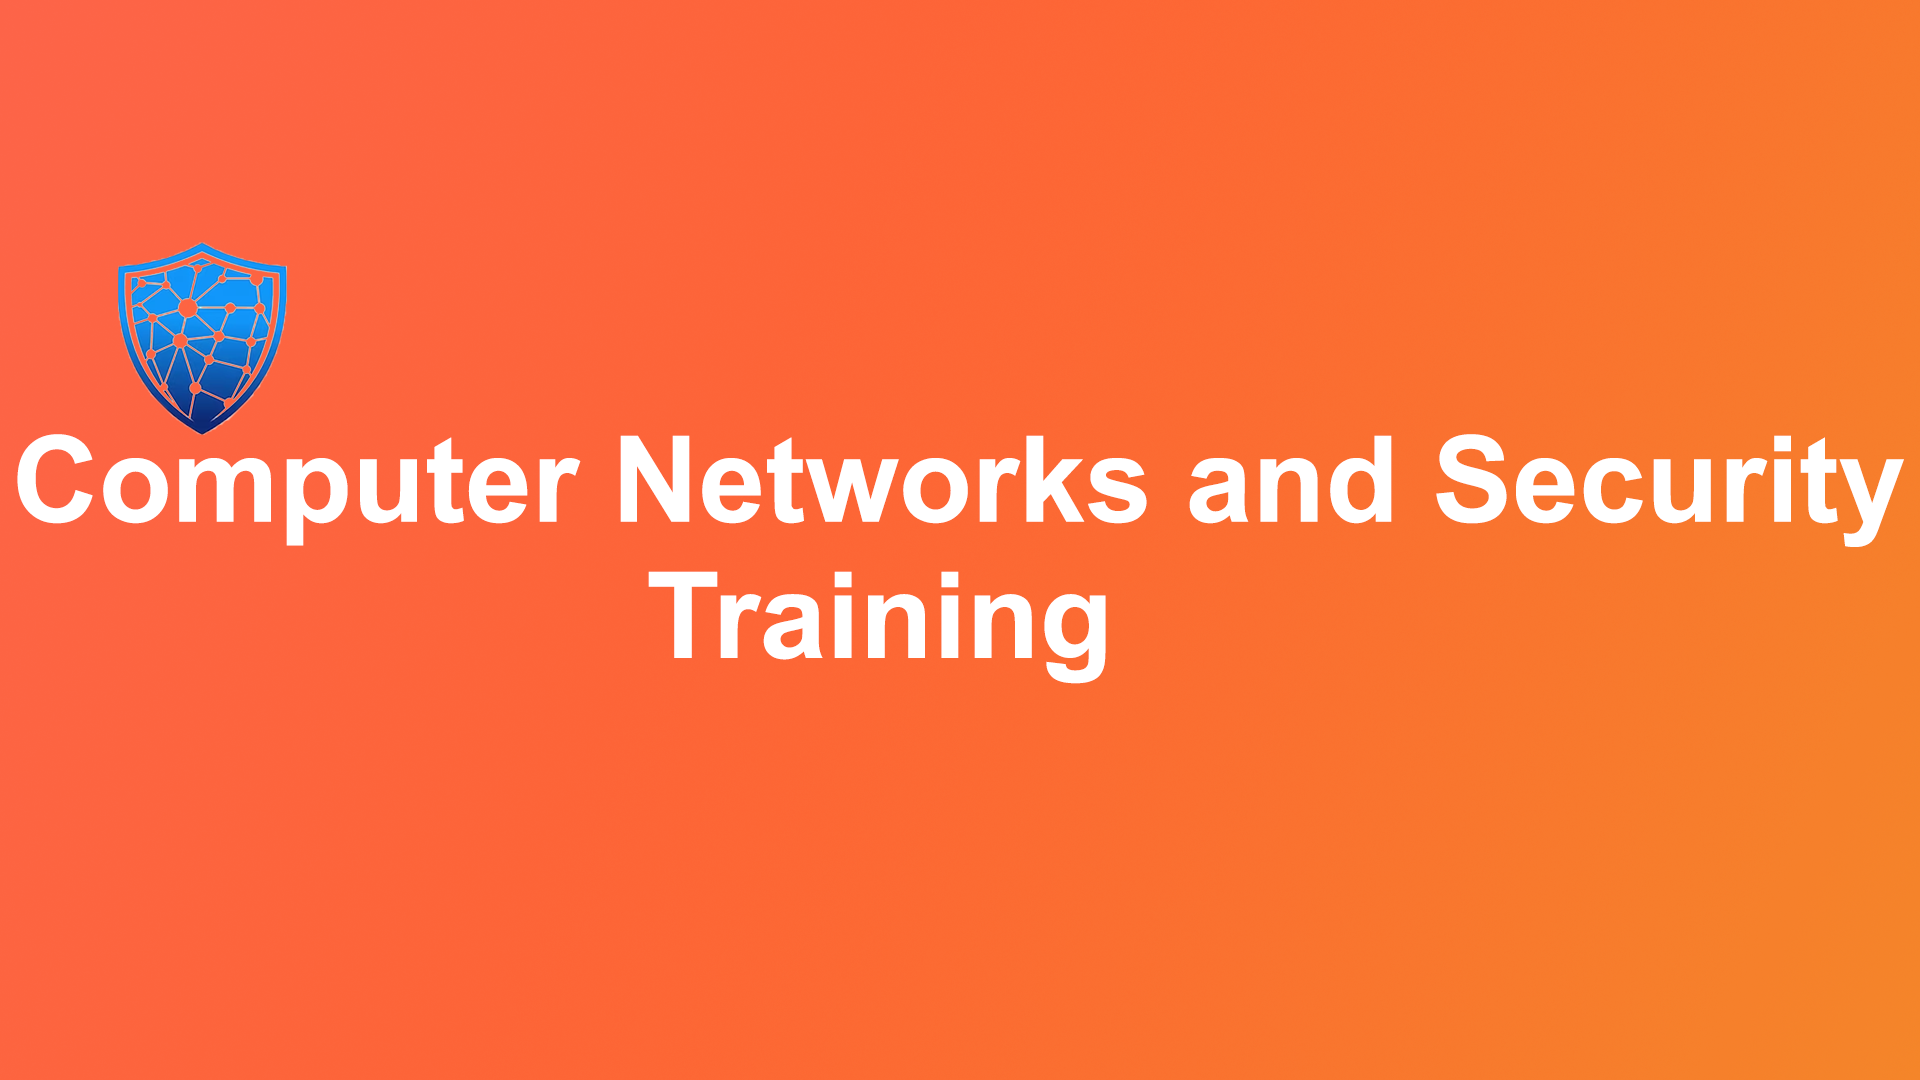 Computer Networks and Security Training